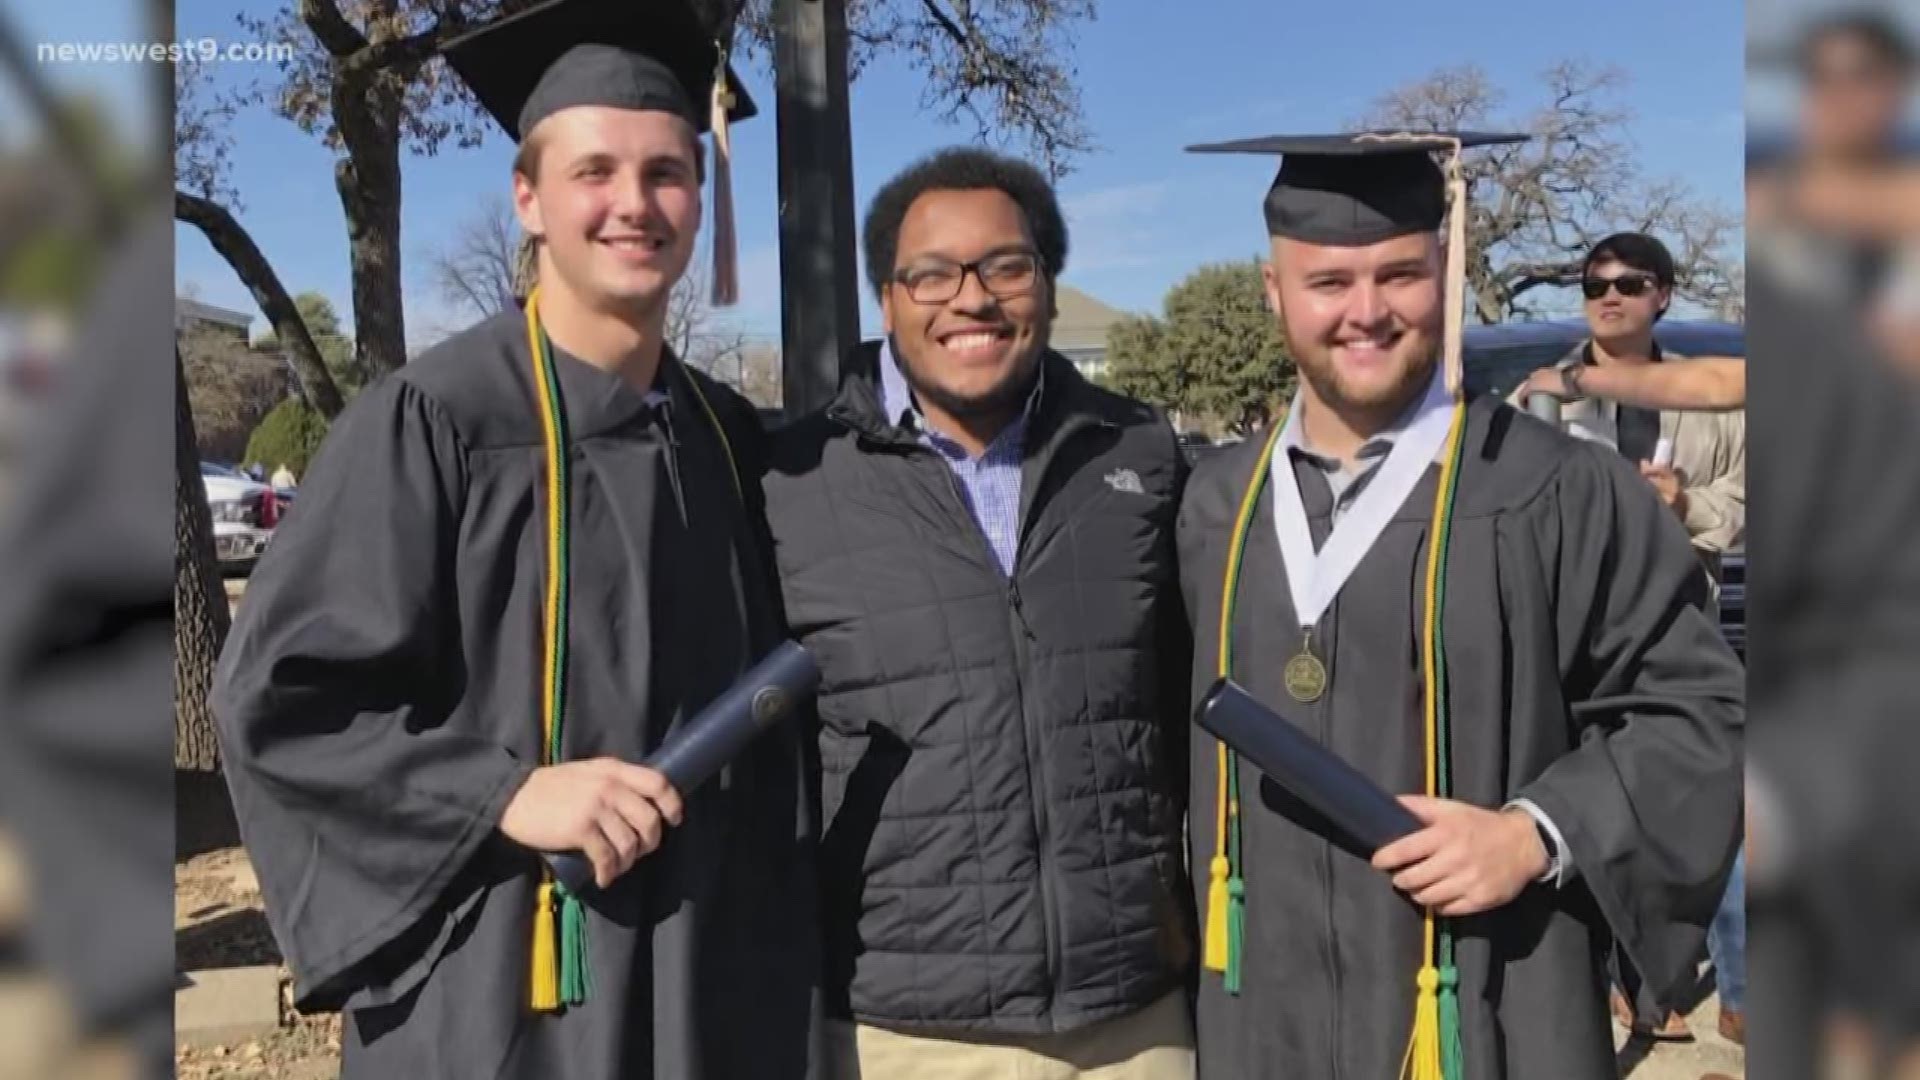 Trio of friends who played football at Midland High continued their careers together in college to help build the program